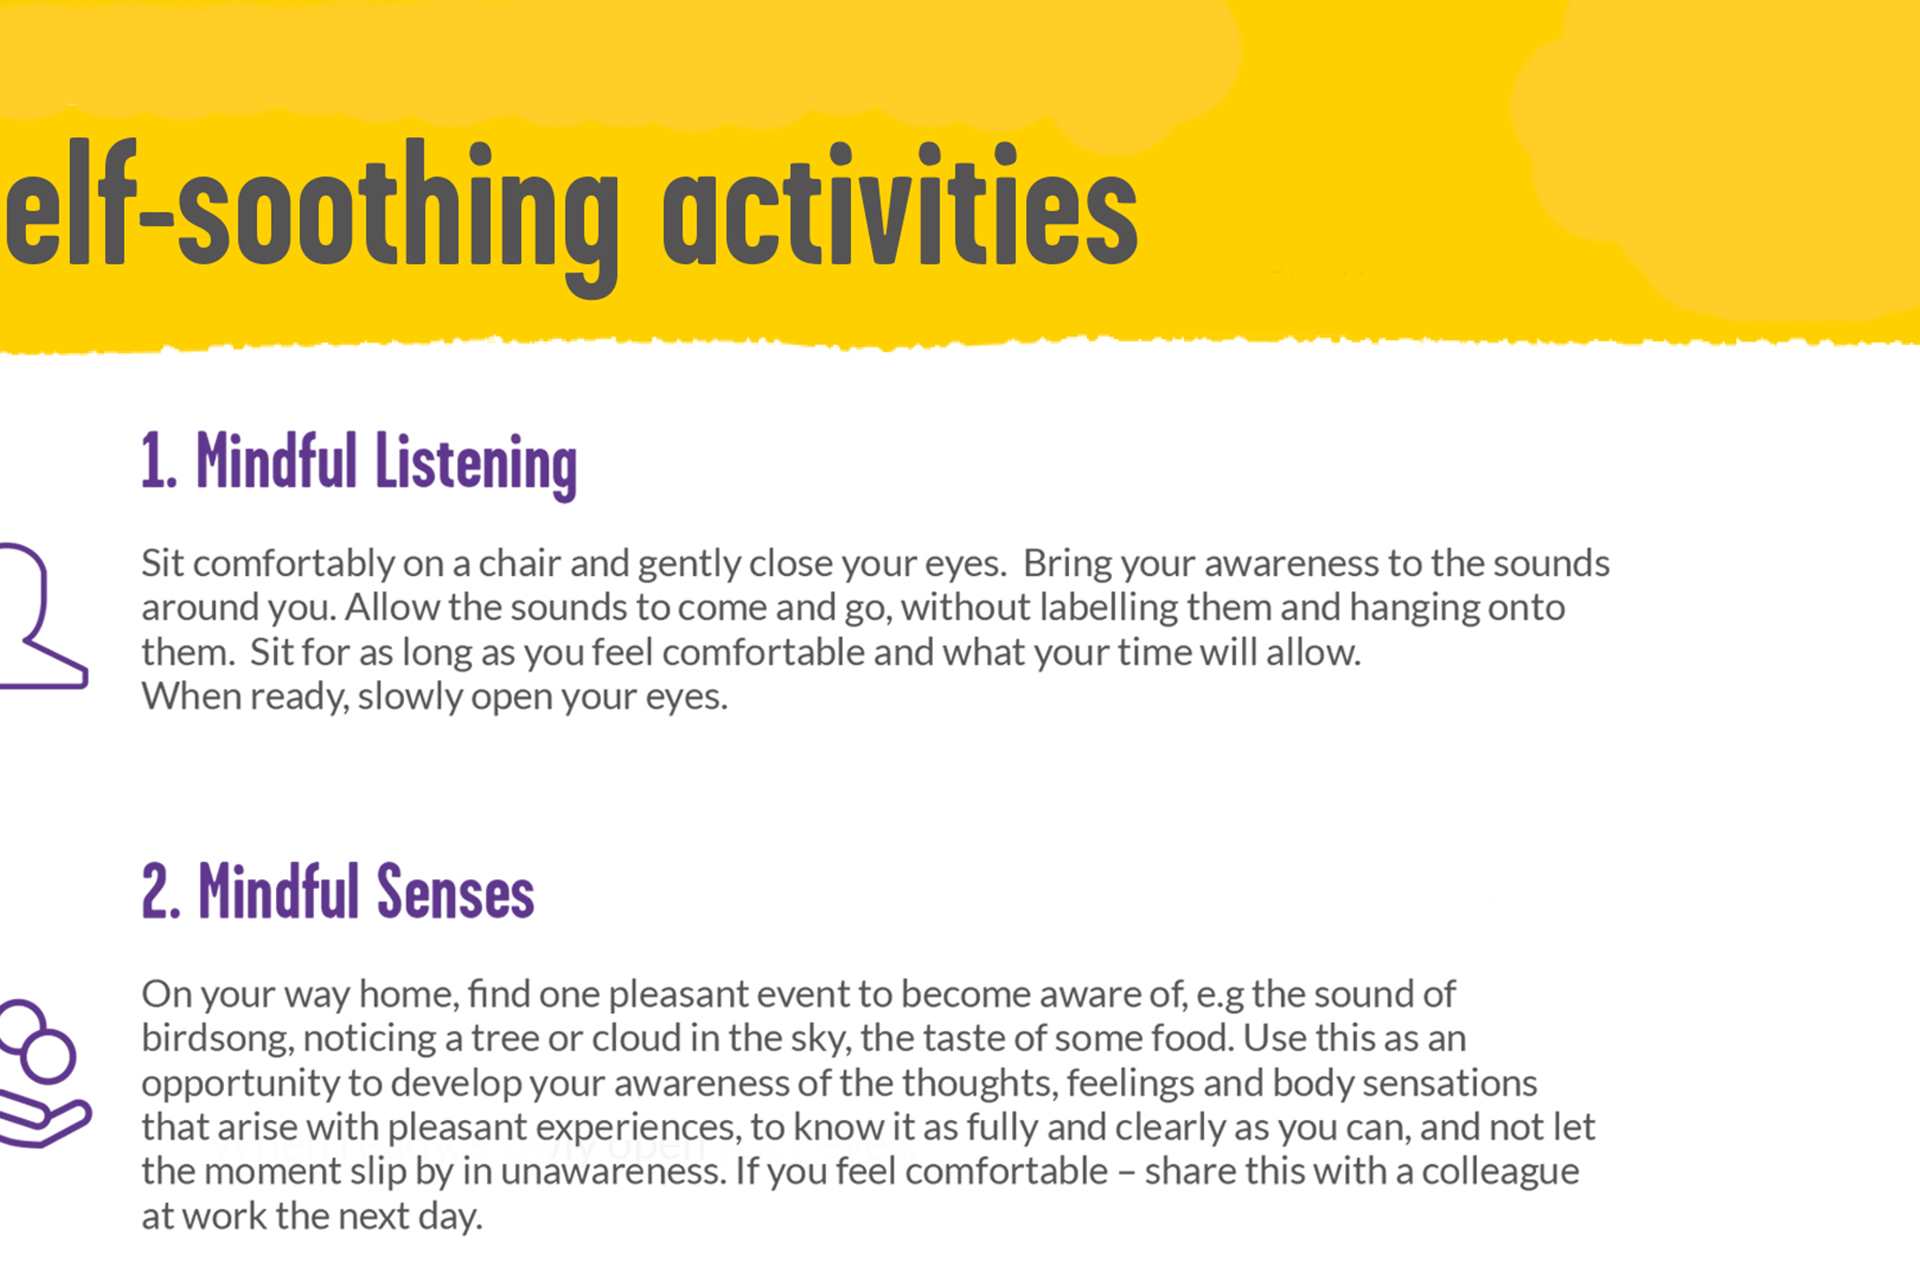 An image of our 'Self-soothing activities' poster. On the left hand side of the poster next to the first two bullet points is an outline of a person and below it a outline of a hand with coins above it.